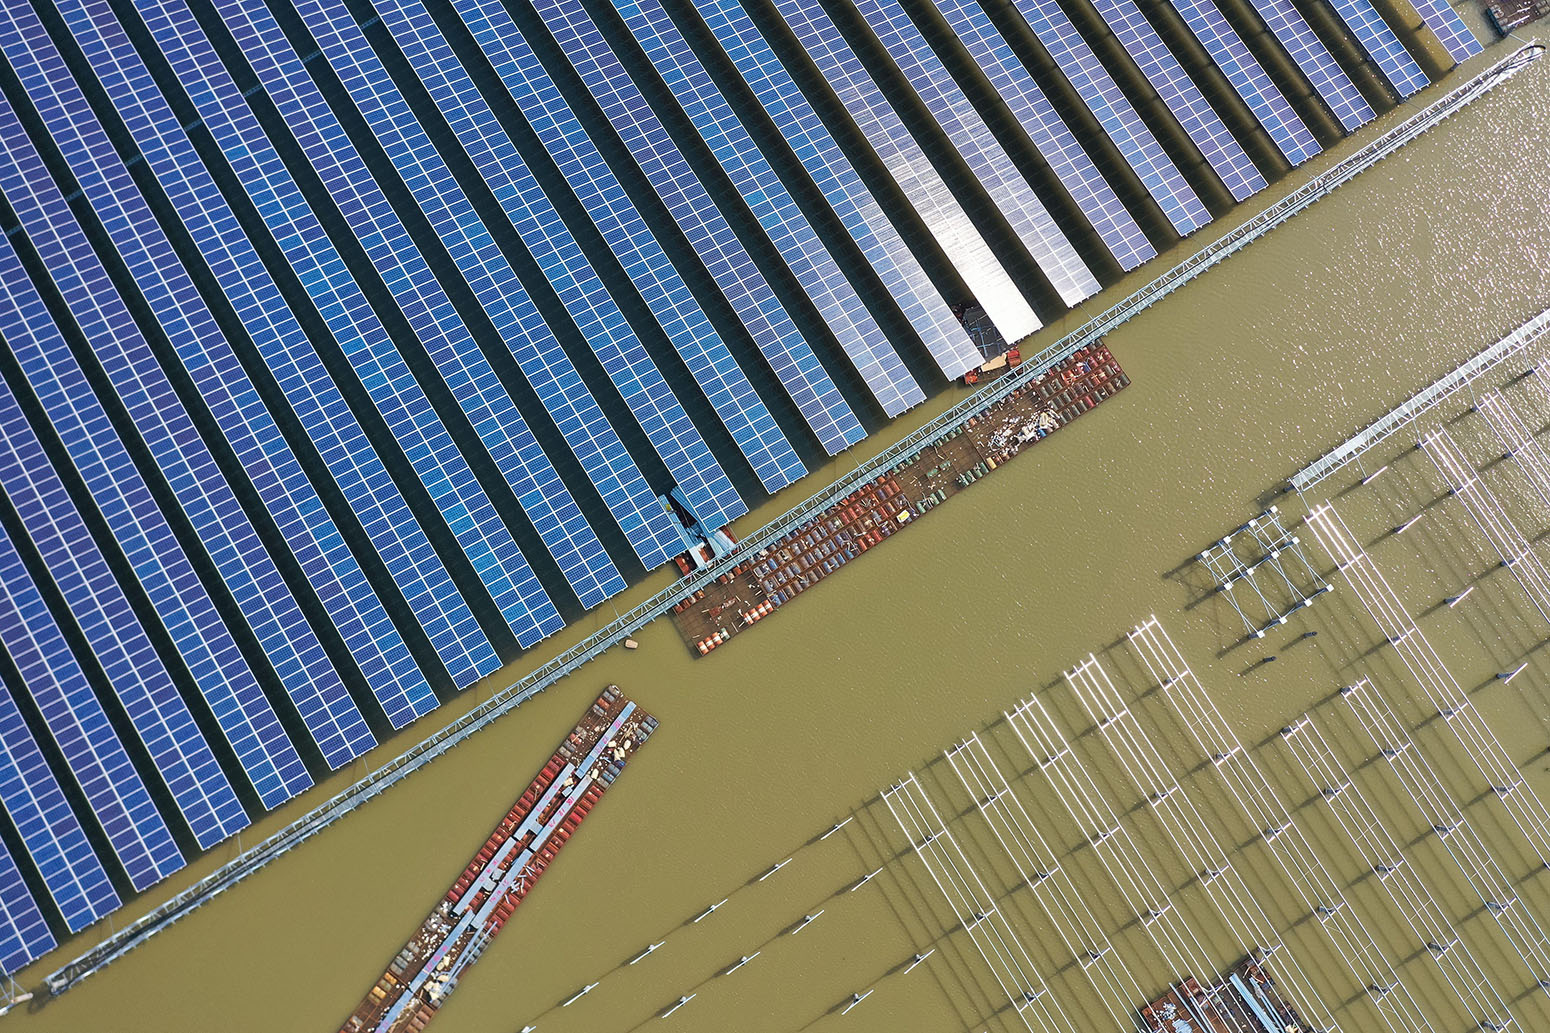 Aerial view of solar panels at a power station in Ningbo City, Zhejiang Province, China, 7 December 2019. Credit: Cynthia Lee / Alamy Stock Photo. 2AE7EFY